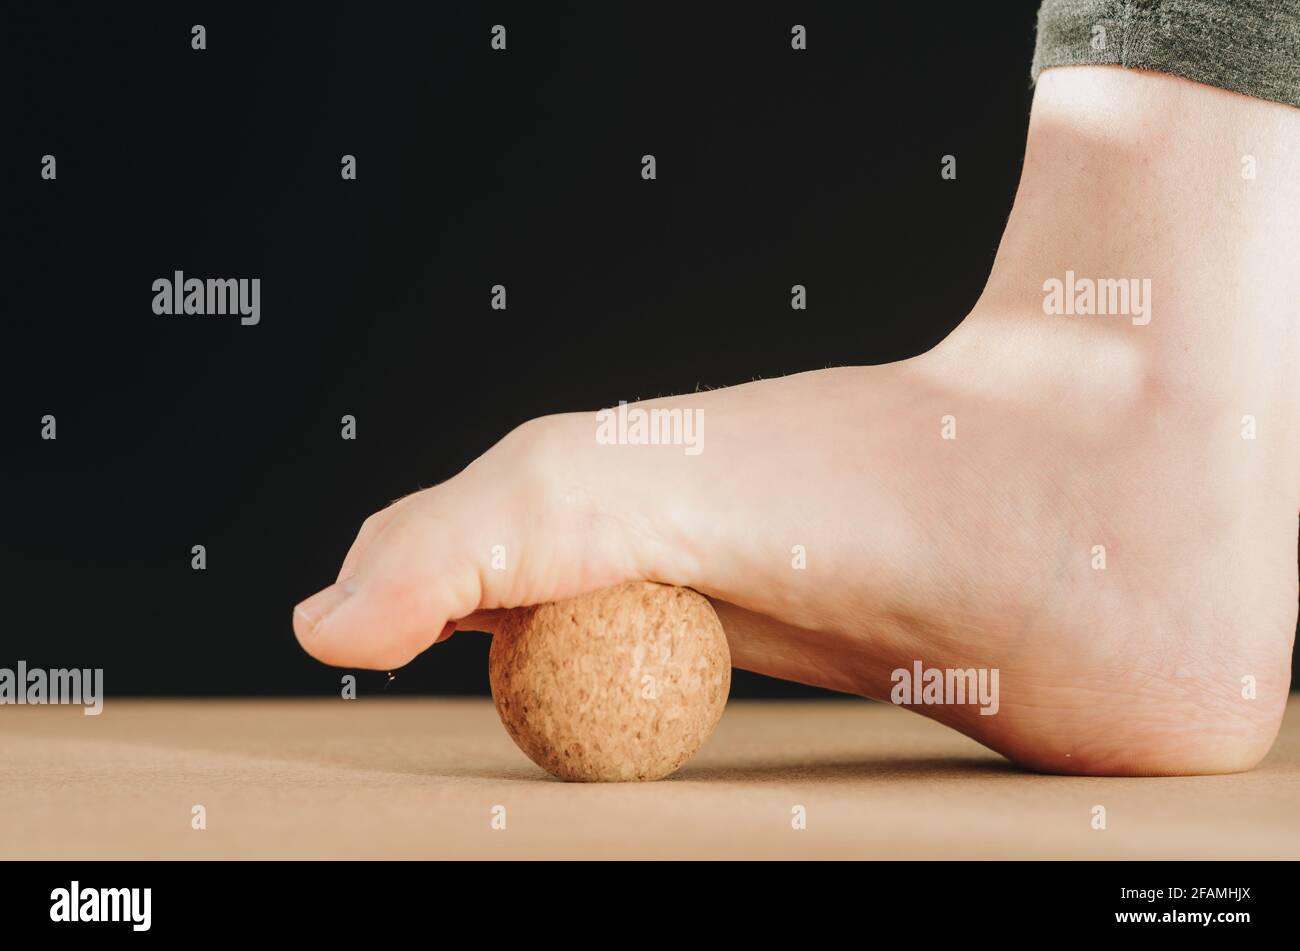 Artistic isolated close up foot on cork massage ball on cork yoga mat for plantar fascia massage and hydration on black background with copy space Stock Photo